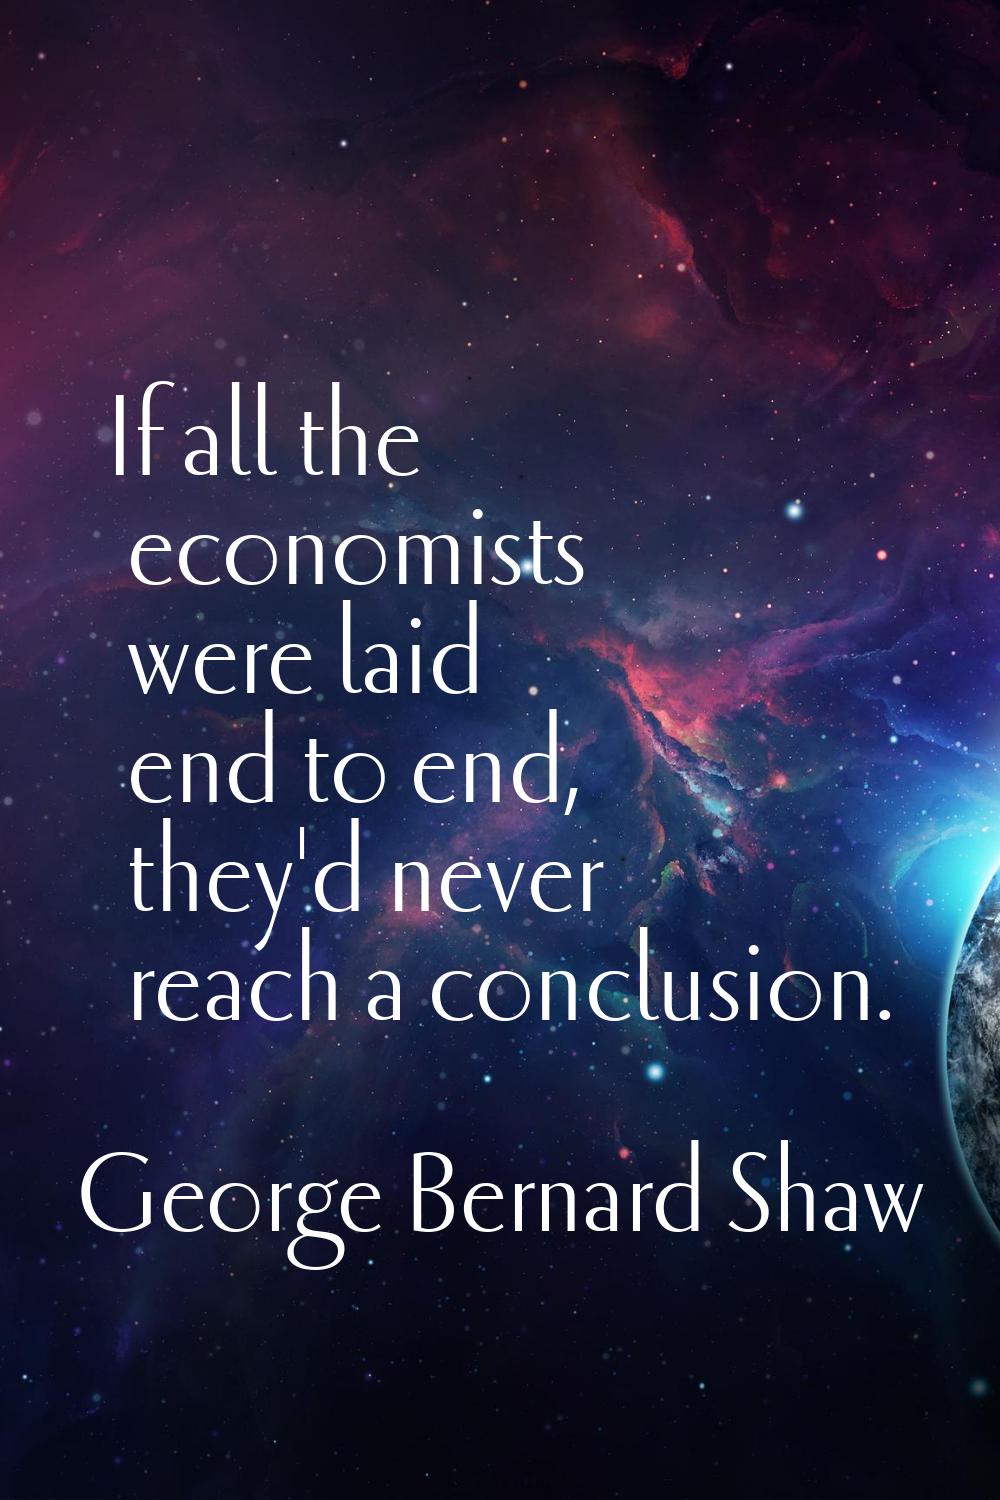 If all the economists were laid end to end, they'd never reach a conclusion.